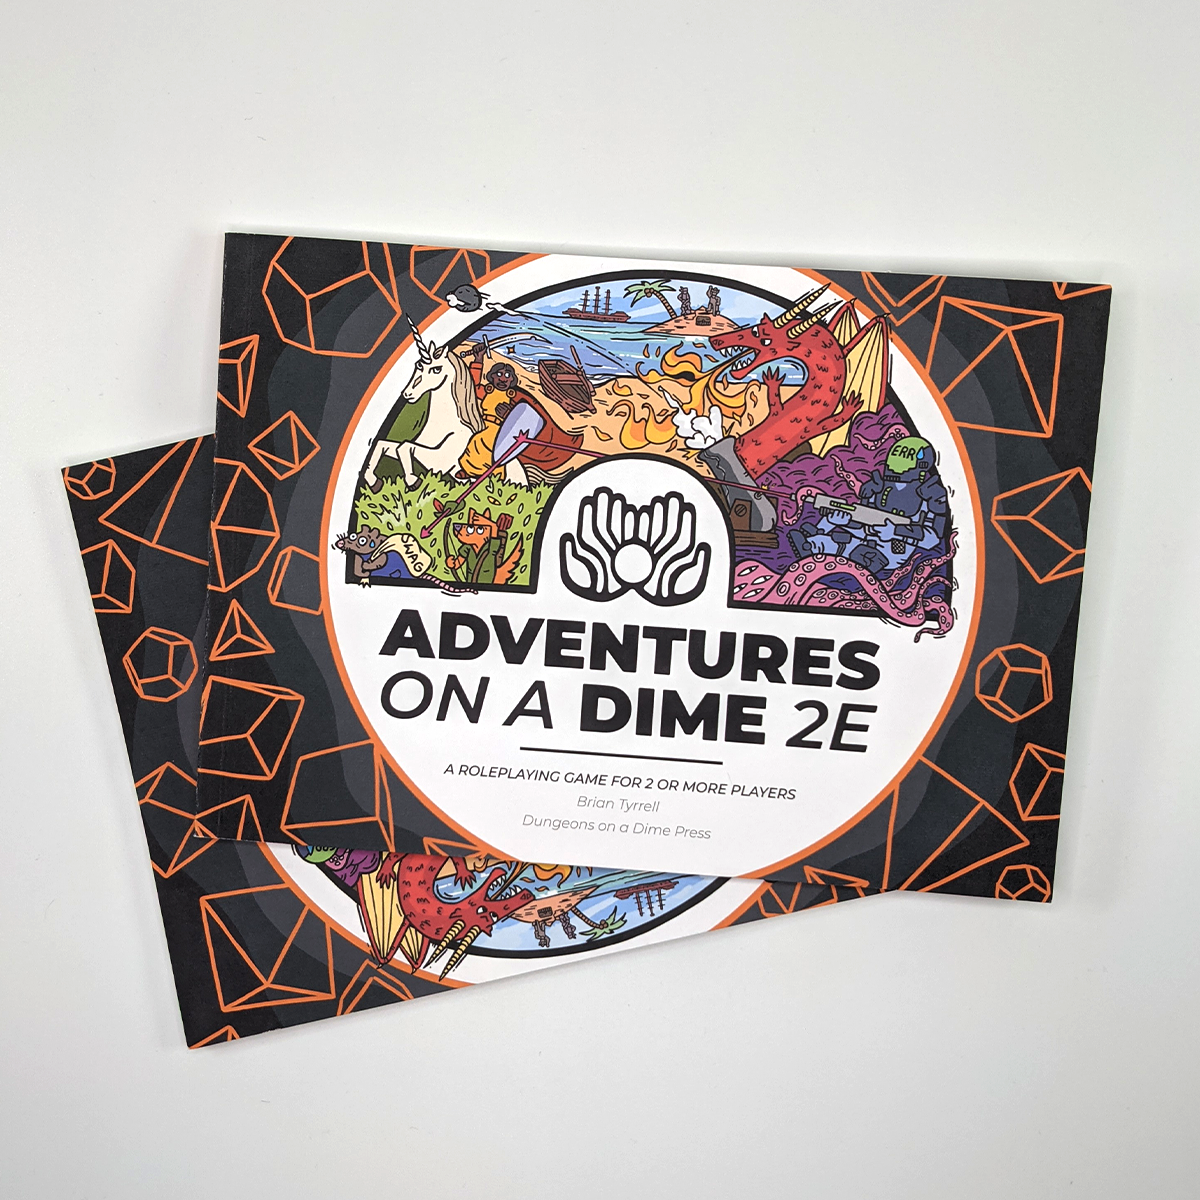 Photo. Front cover of Adventures on a Dime, featuring a chaotic scene of space marines, pirates, dragons, knights and roguish animals.